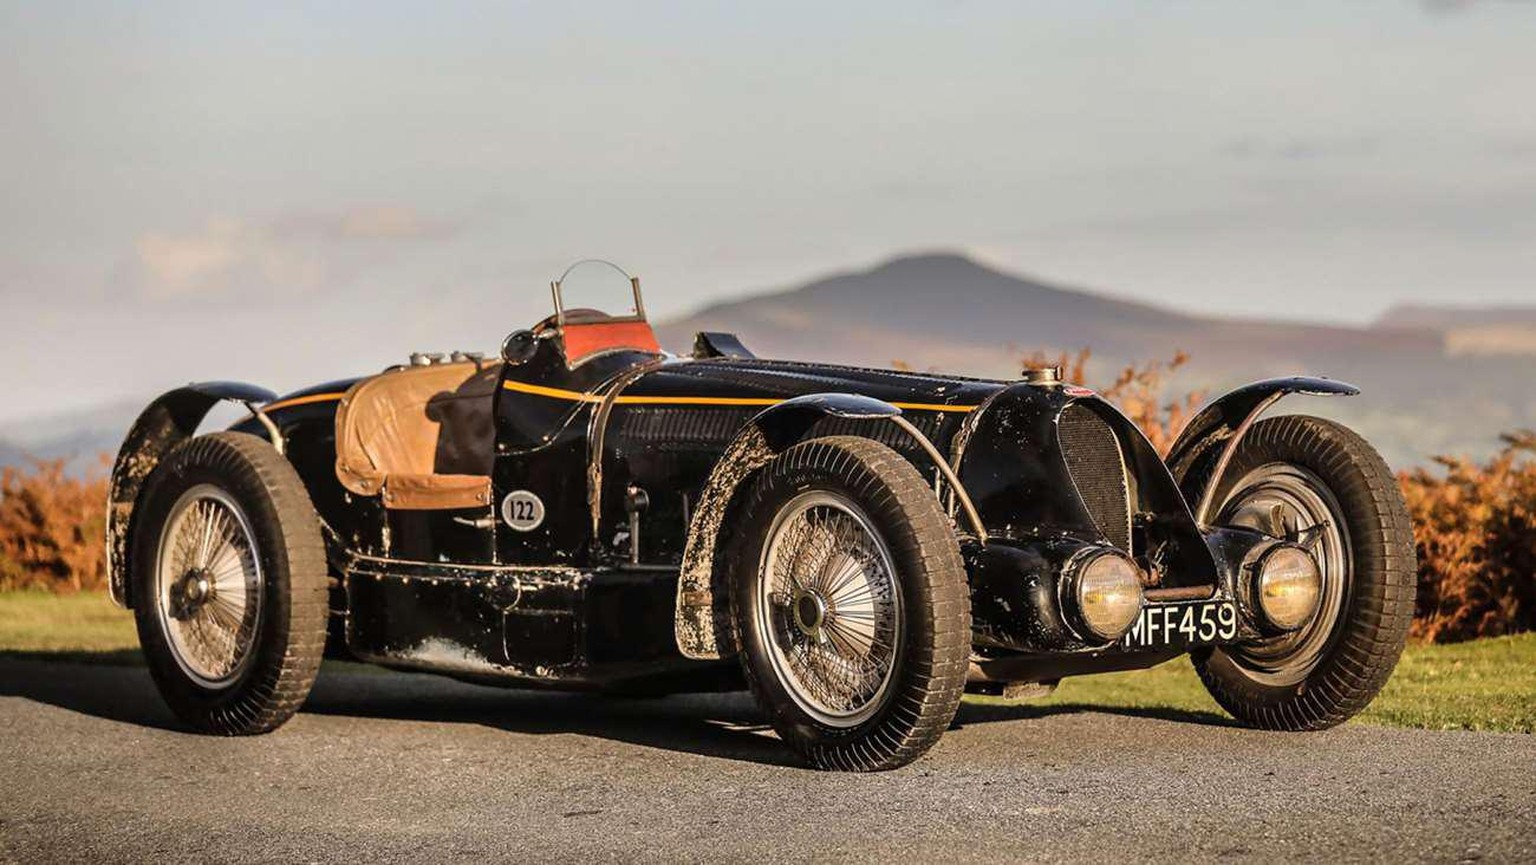 https://www.goodwood.com/grr/road/news/2020/9/this-ultimate-miura-sv-speciale-just-sold-for-3.2-million/

1934 Bugatti Type 59 Sports
 Sold for £9,535,000 ($12,666,600)

Gooding &amp; Co.; “Passion of ...